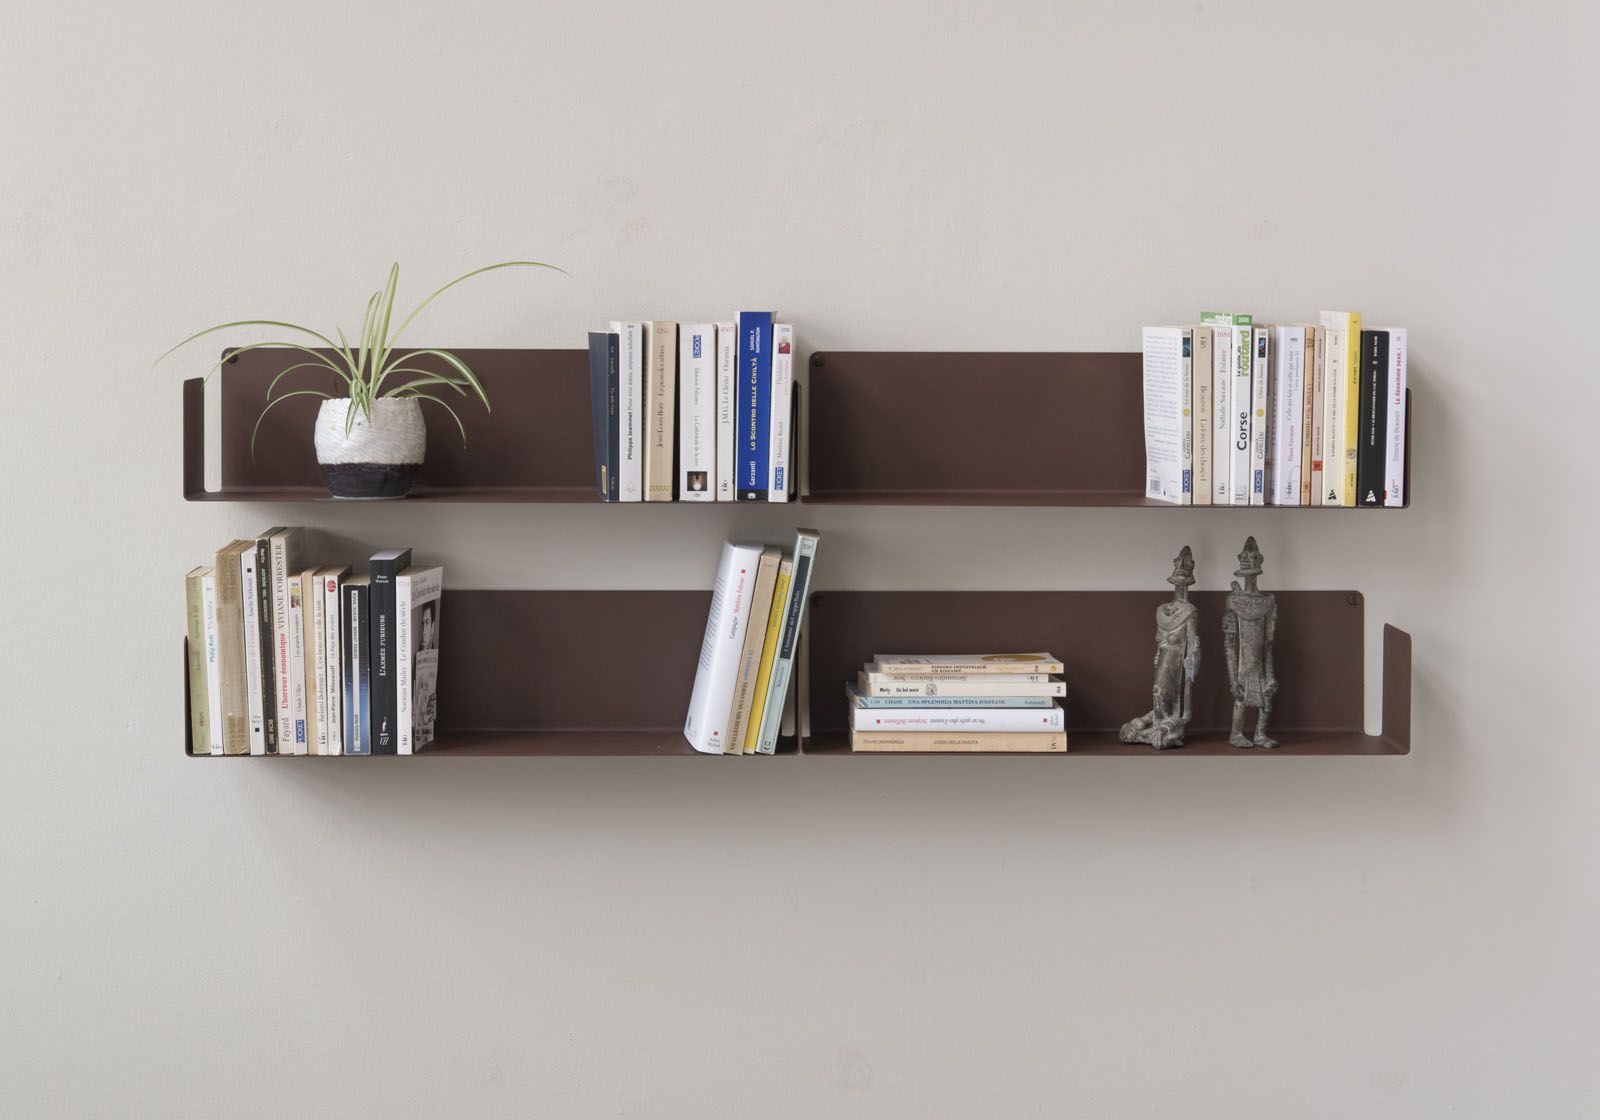 Floating shelf rust colour - 17.71 inches - Set of 2 Rust color shelves - 4